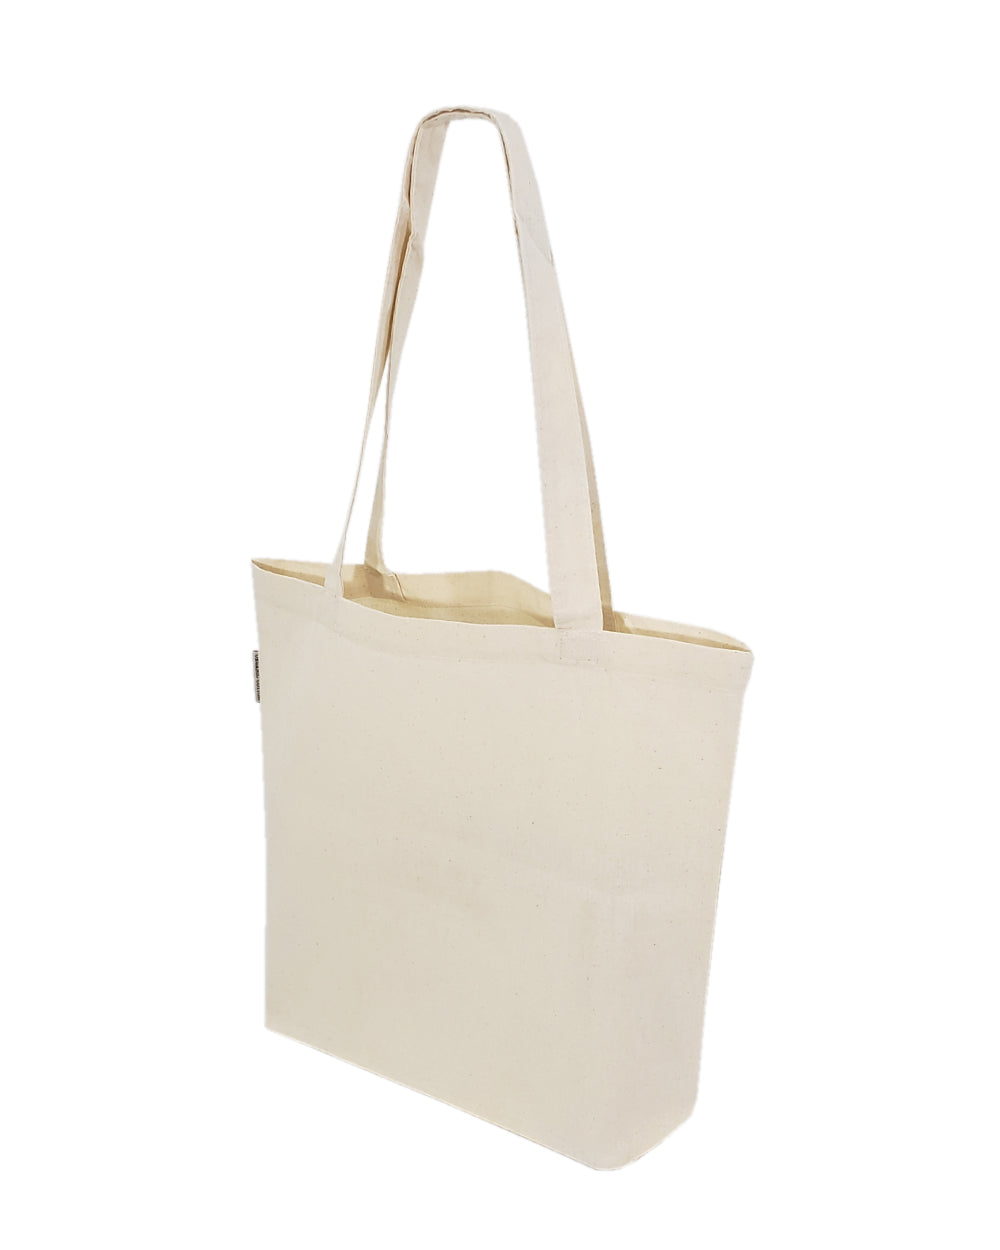 12 ct Organic Cotton Canvas Tote Bags with Gusset - By Dozen